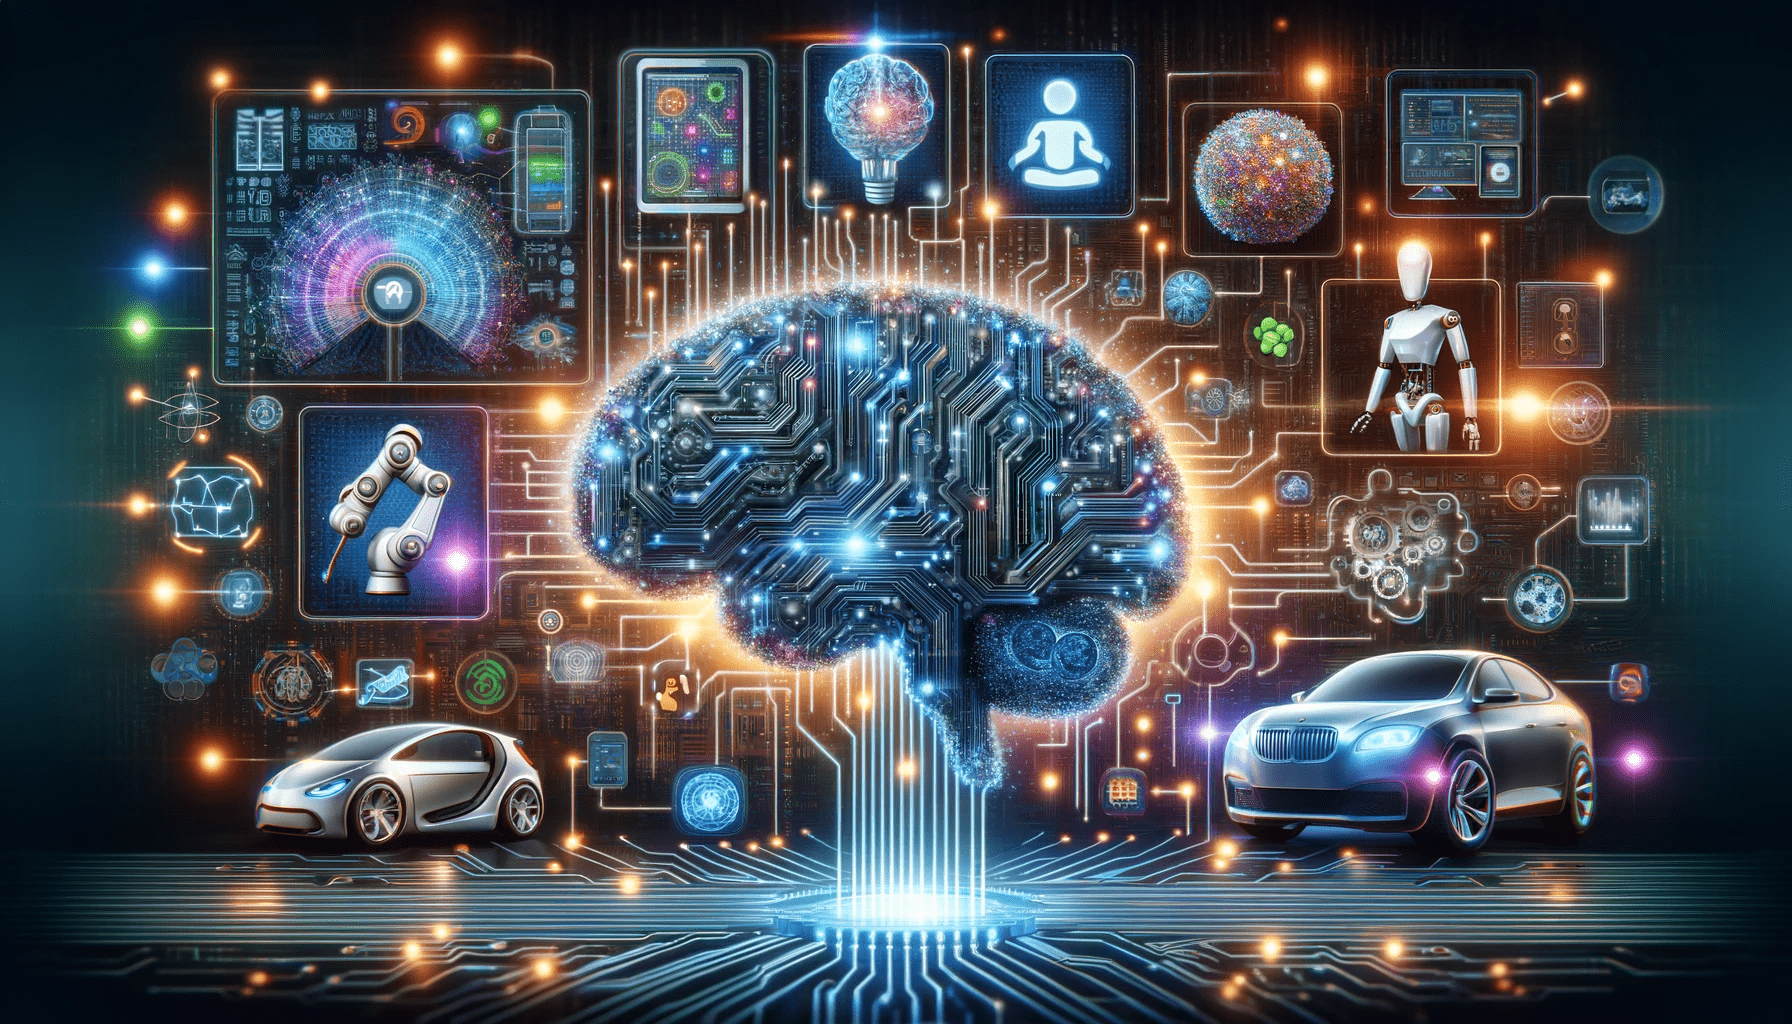  a conceptual representation of Artificial Intelligence (AI). It visualizes the interconnectedness and diverse applications of AI technology. An electric brain is surrrounded by networks of lights and applications including cars and computer screens